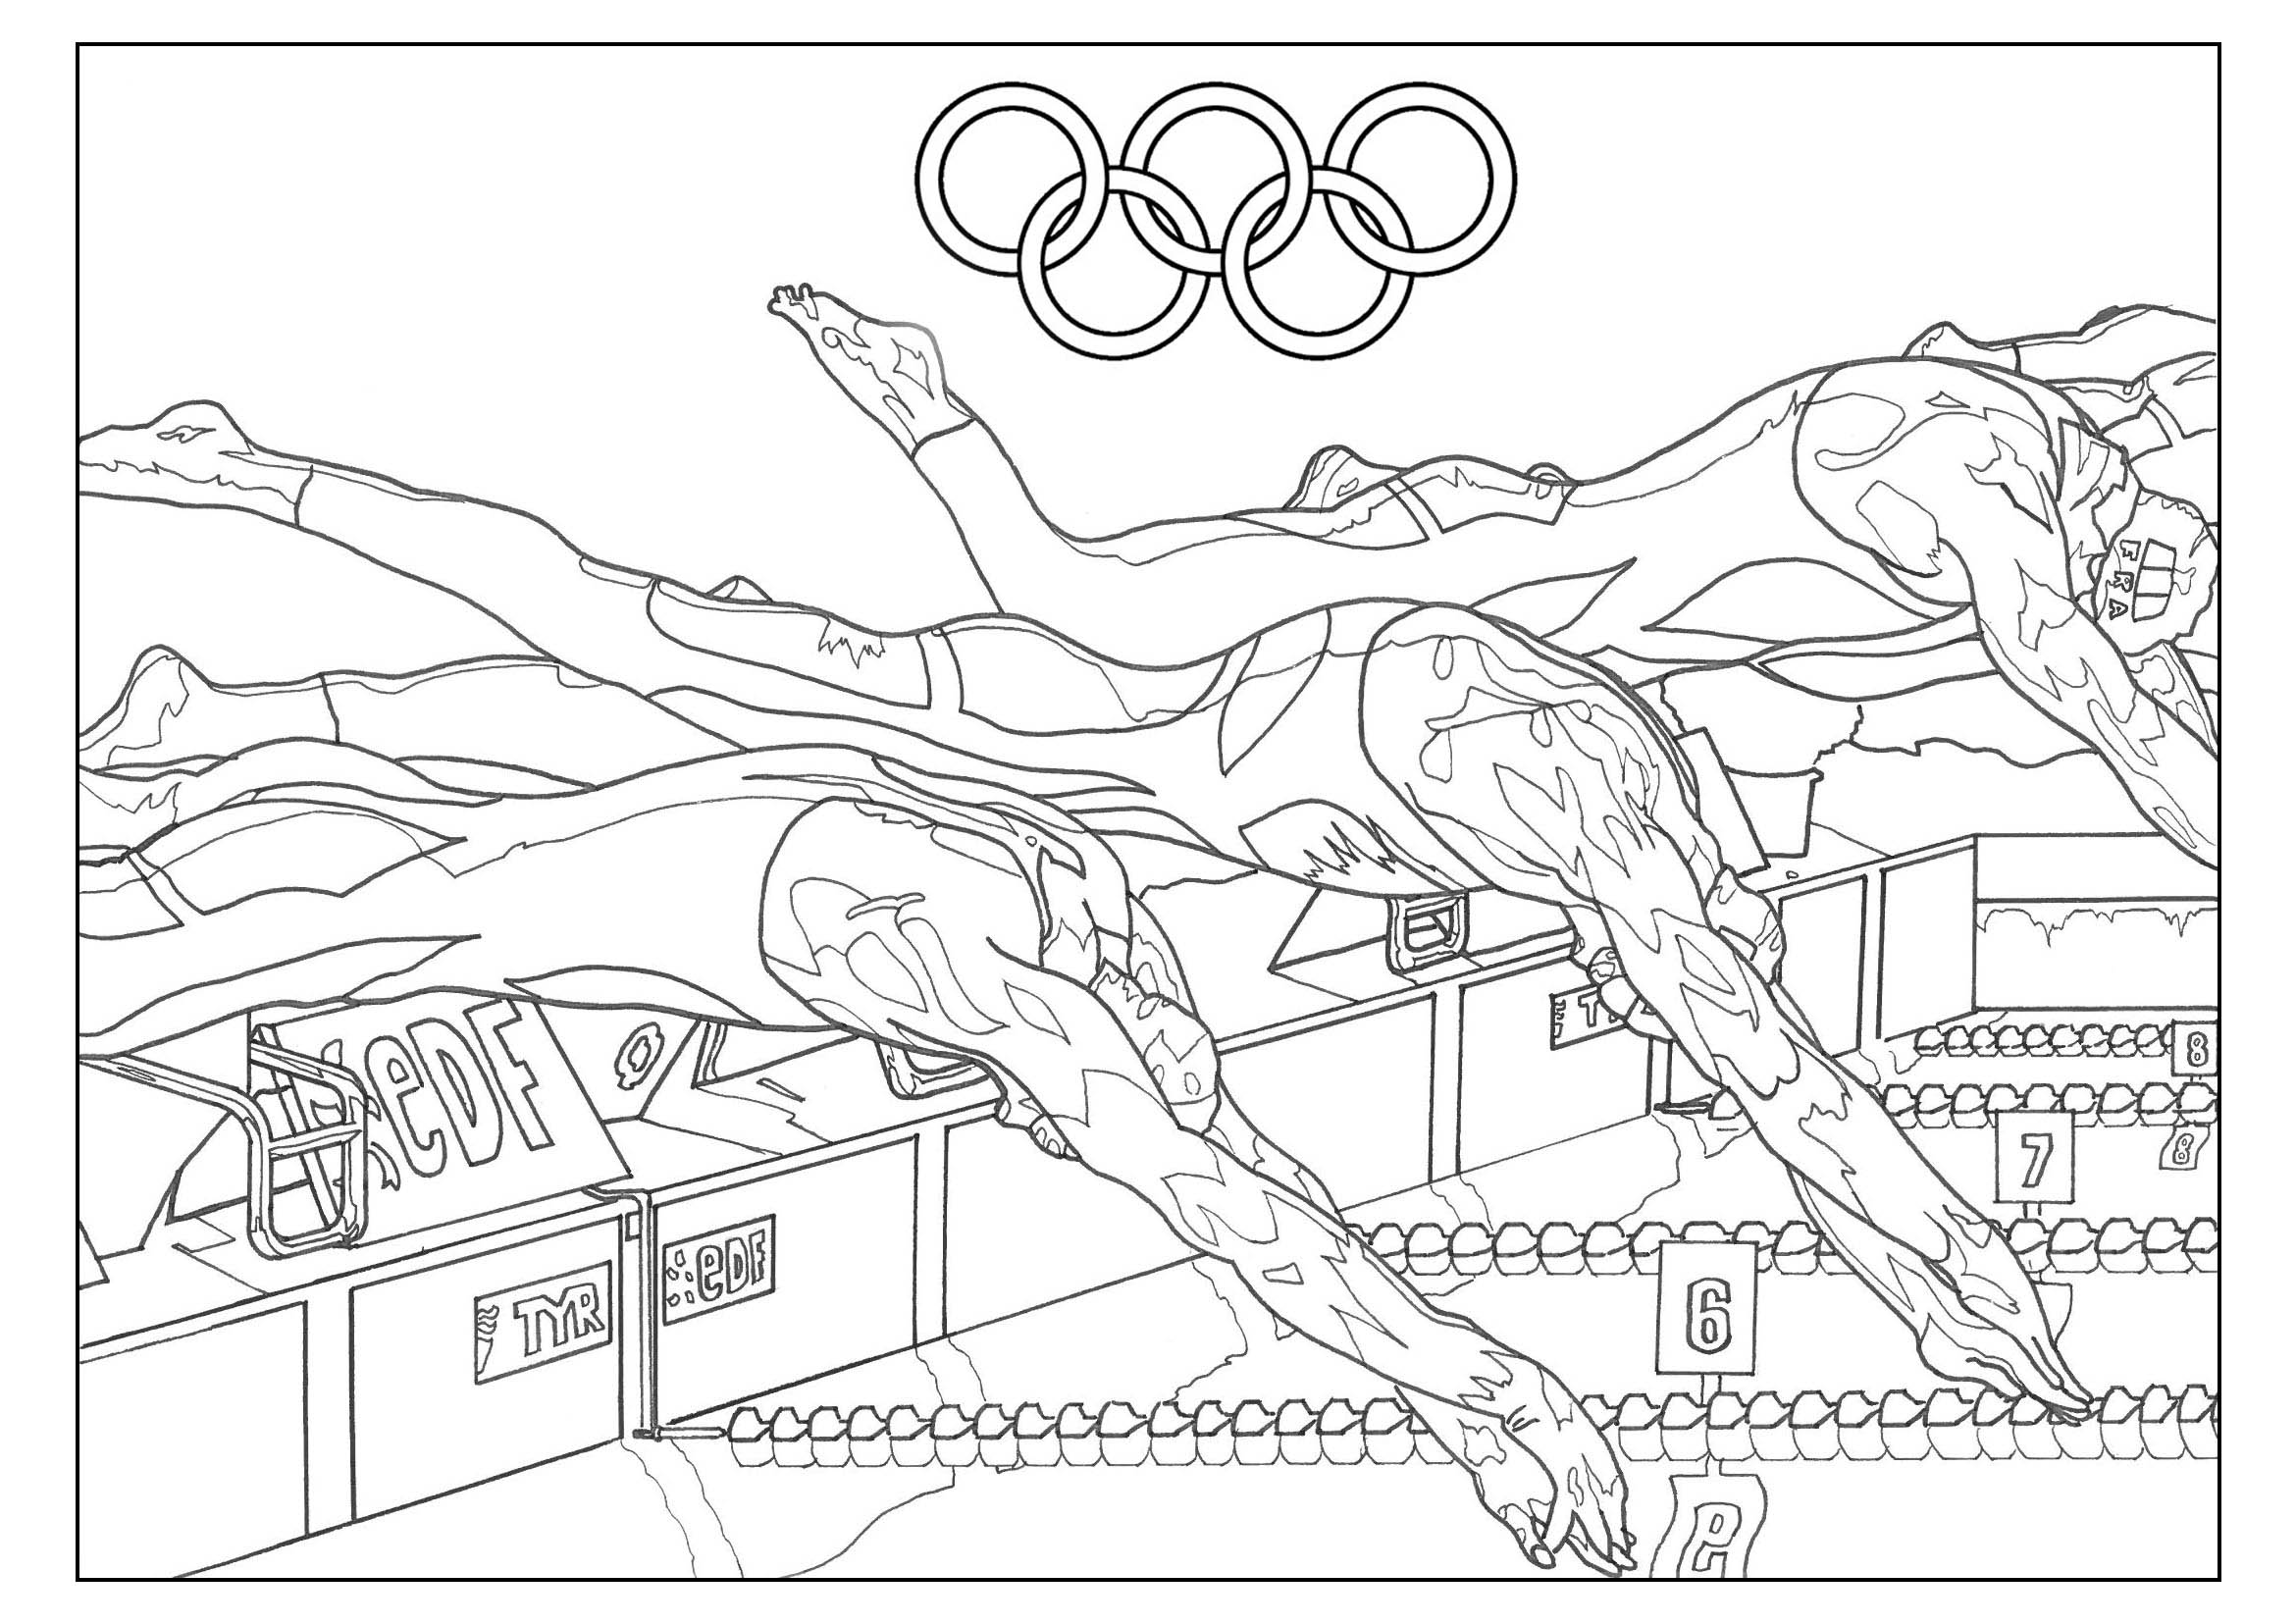 Olympic games to print - Olympic Games Kids Coloring Pages